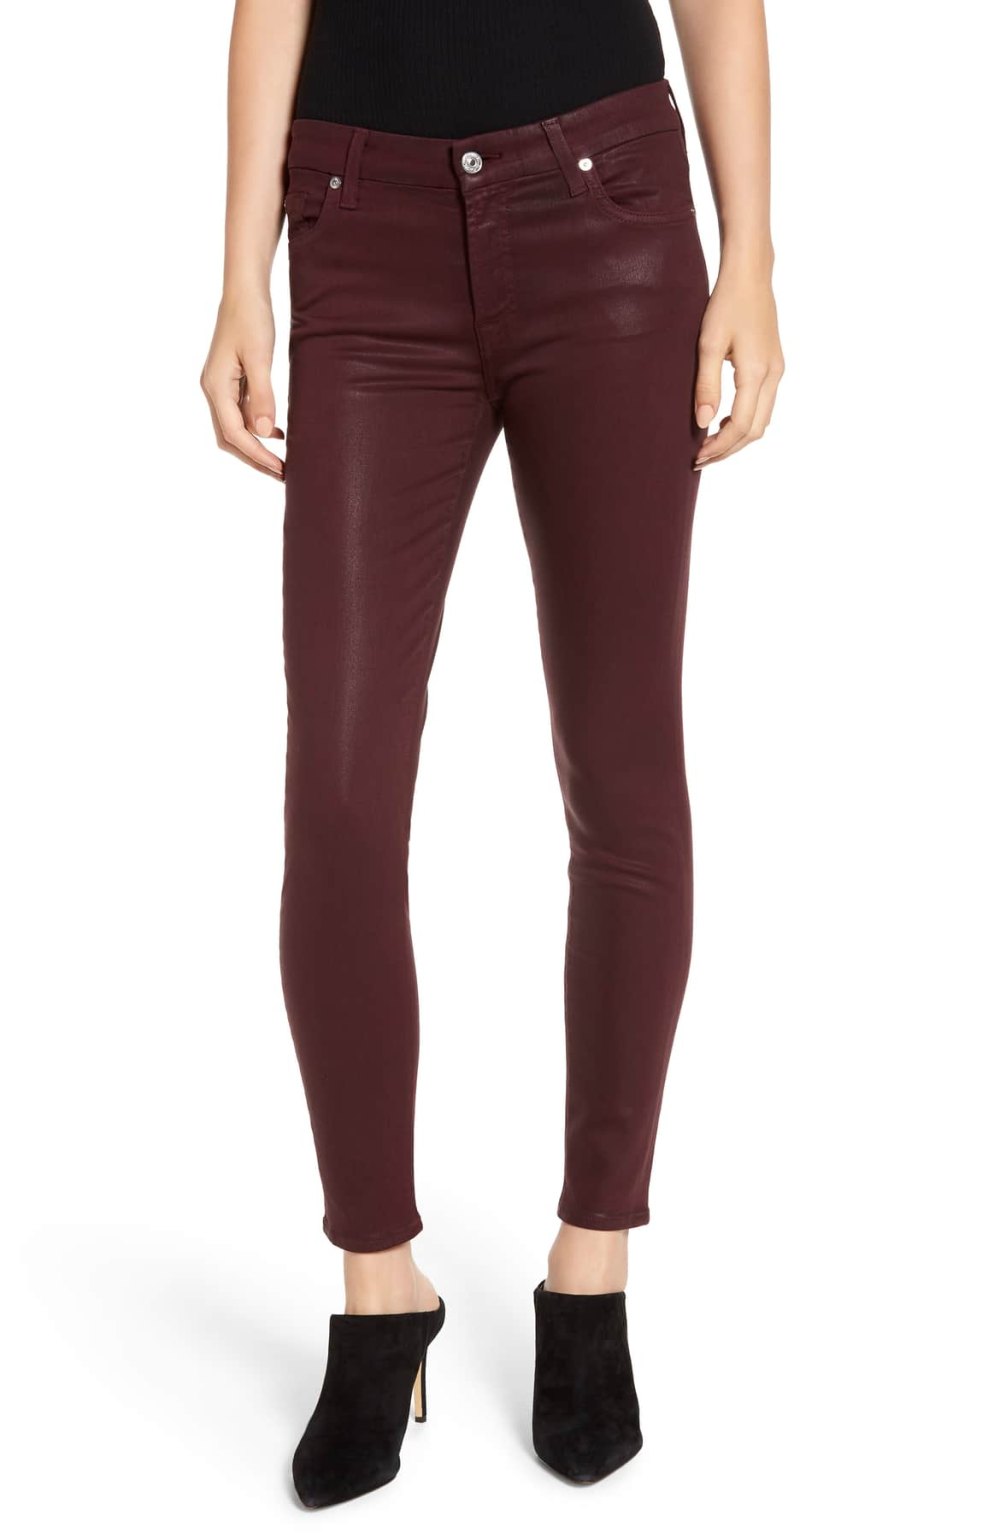 7 for all mankind plum coated skinny jeans